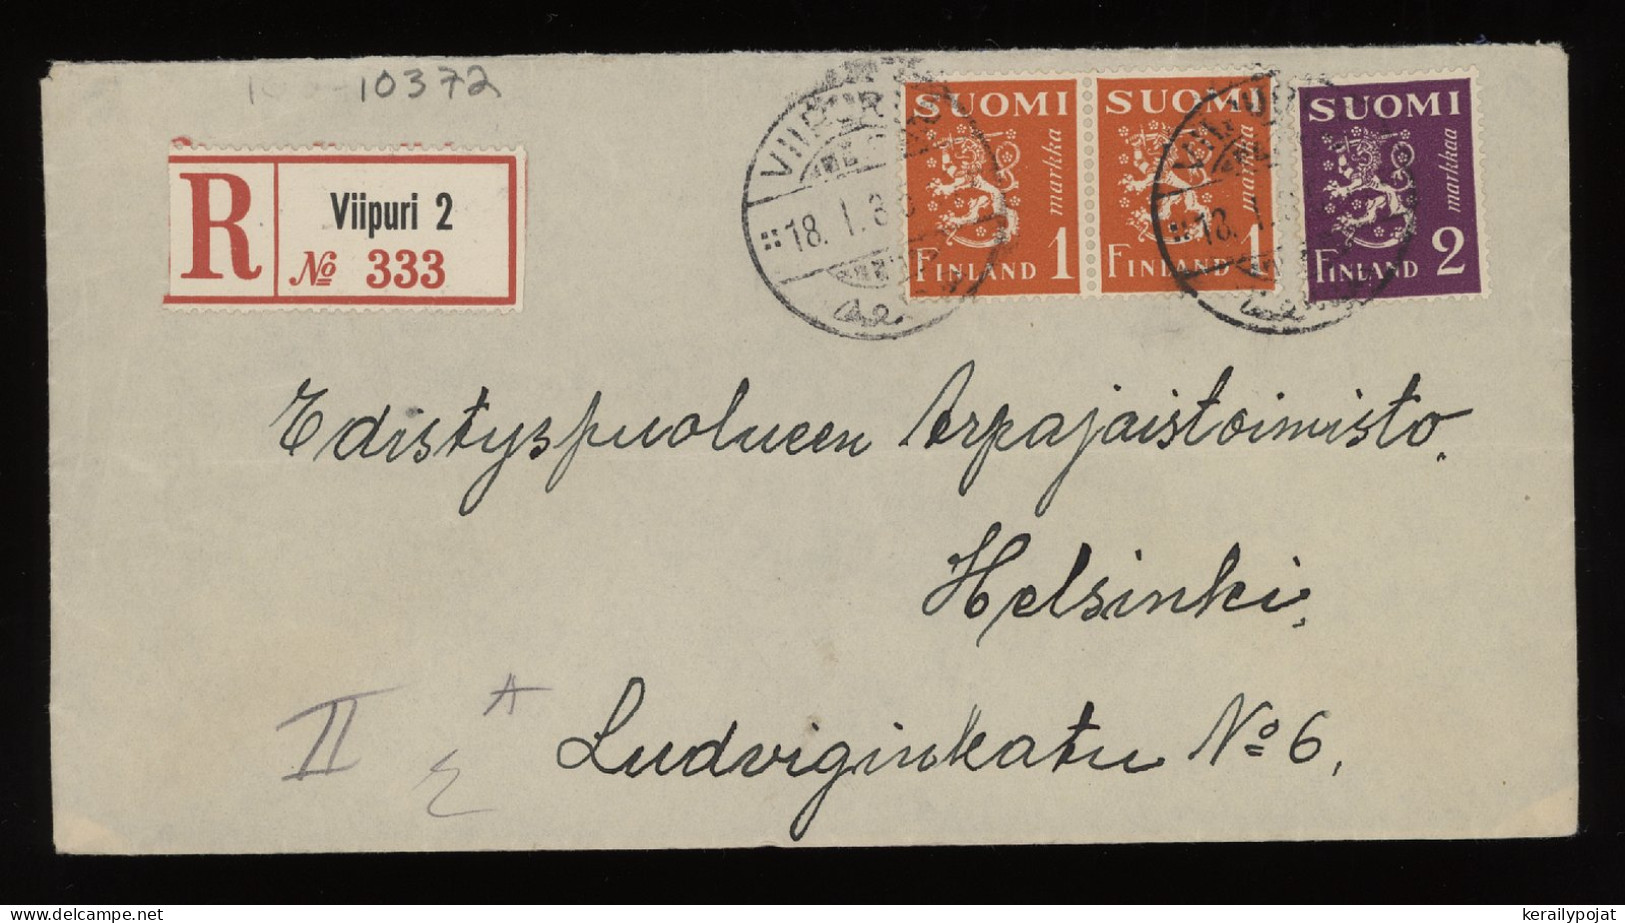 Finland 1935 Viipuri 2 Registered Cover__(10372) - Covers & Documents